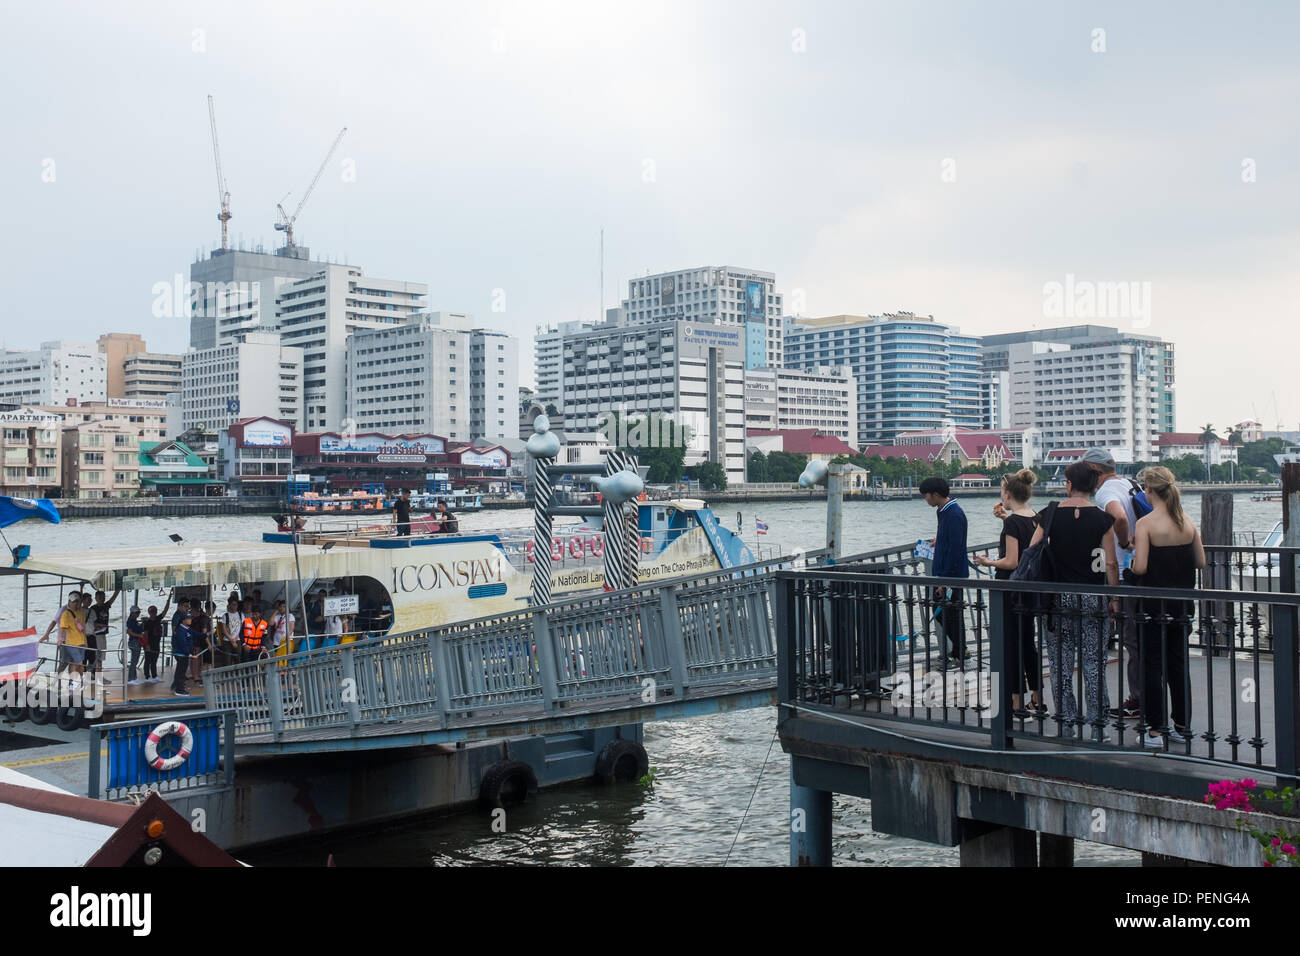 Passengers waiting to board a passenger ferry on the Chao Phraya River in Bangkok, Thailand Stock Photo